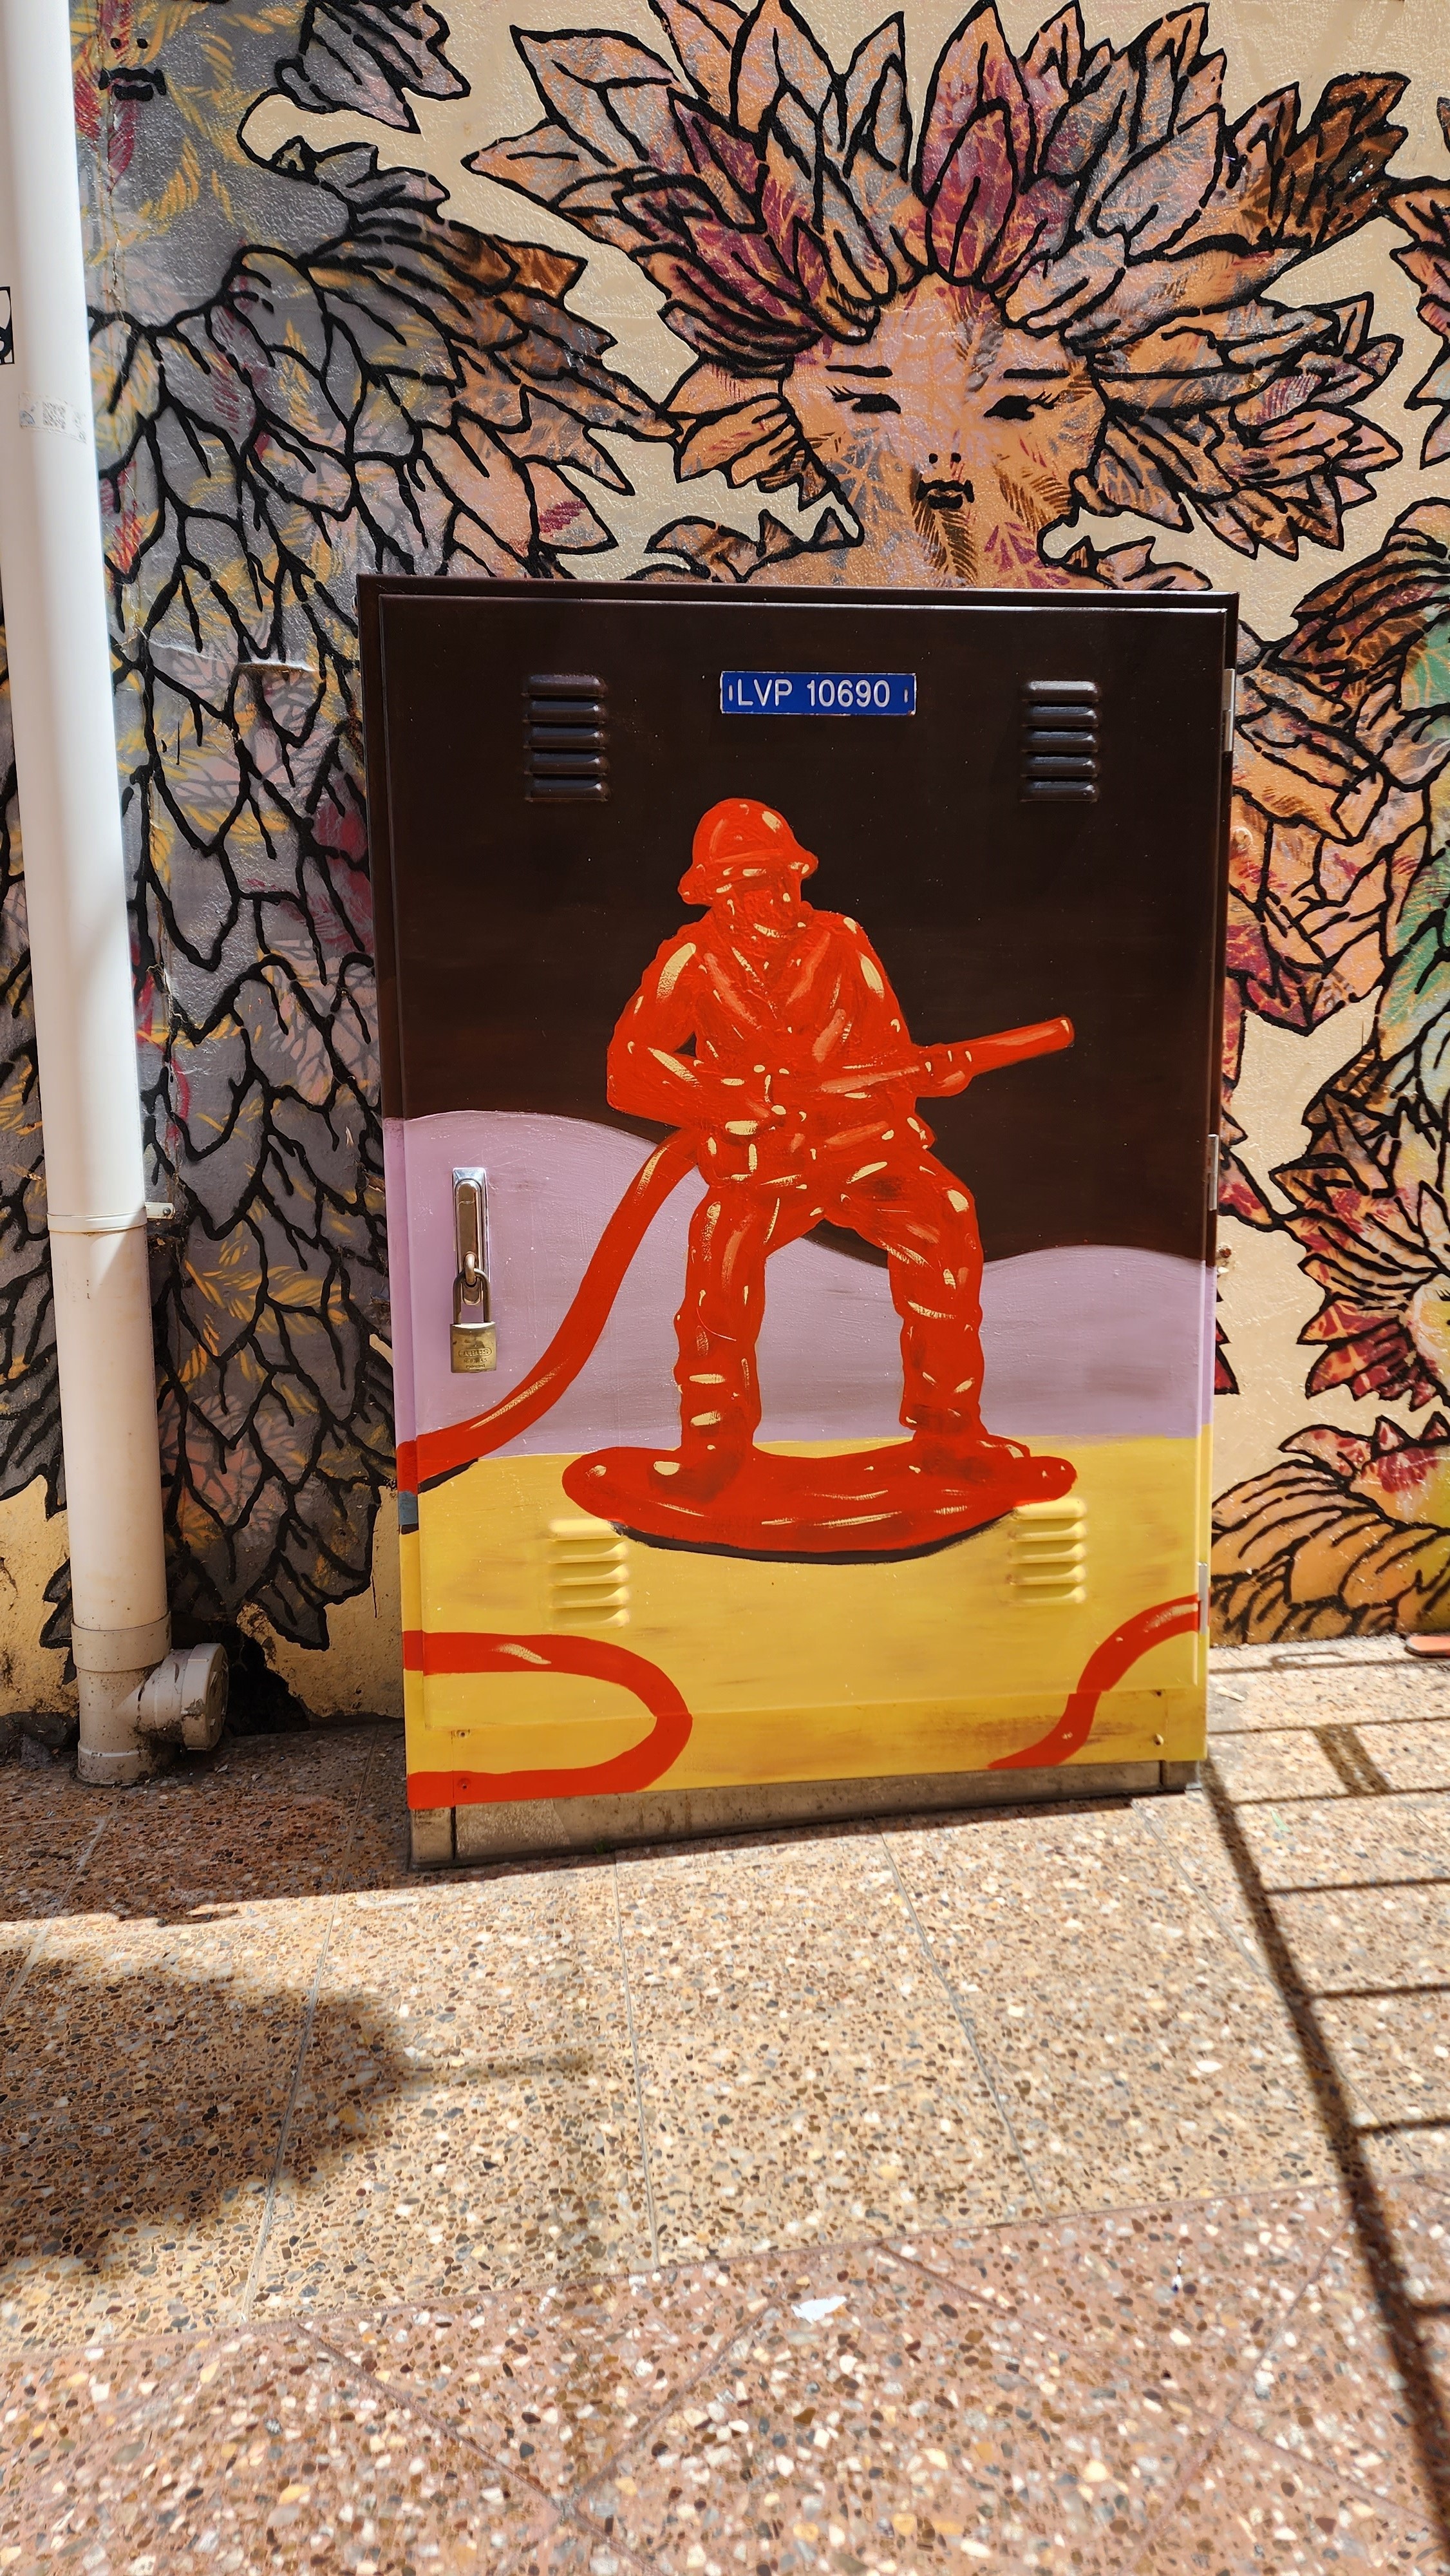 revamped electrical pillar which is painted with a fireman in Russell Lane1.jpg